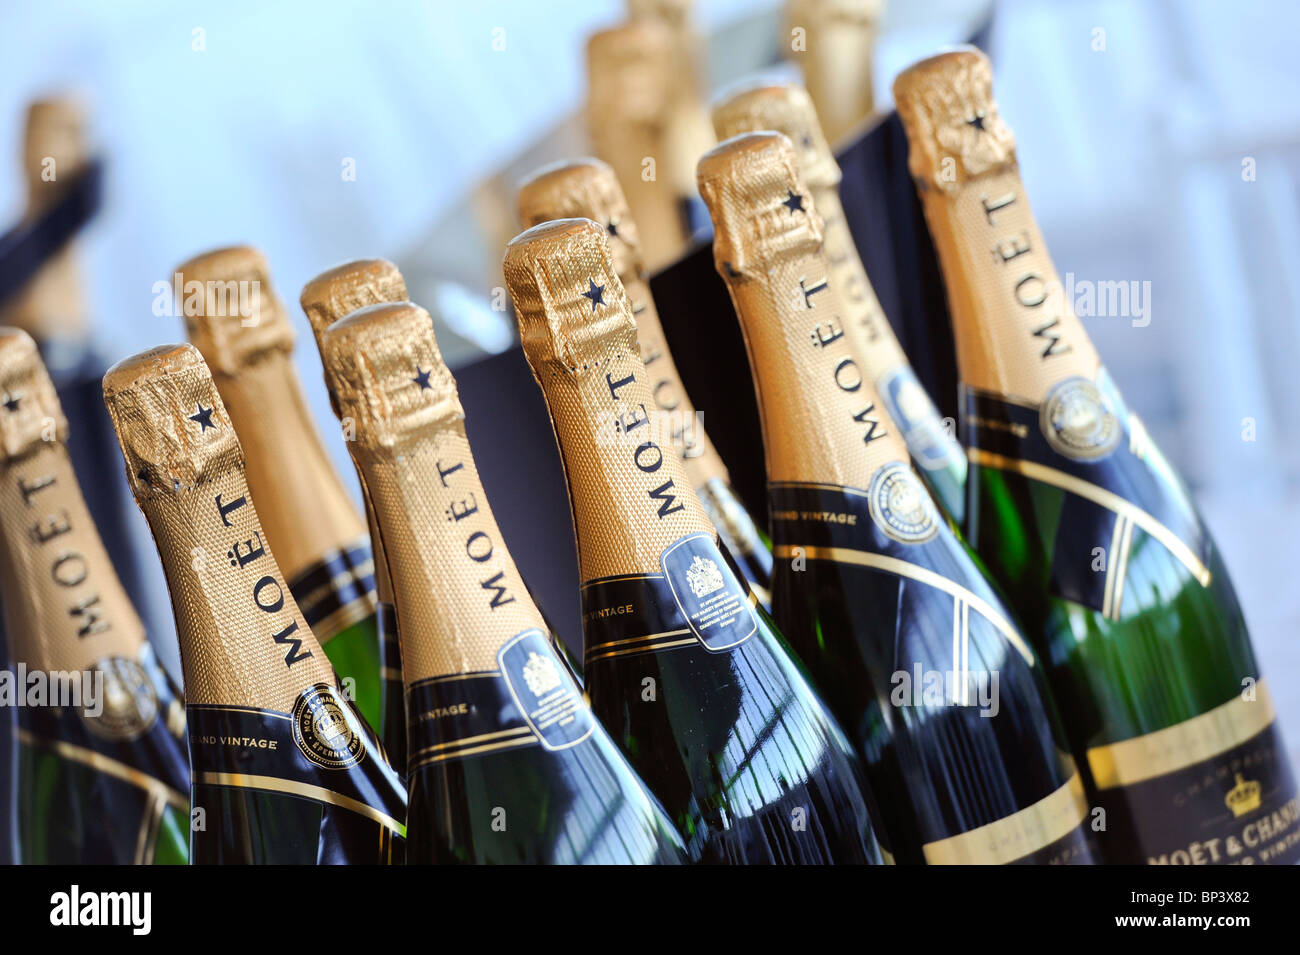 Moet hennessy louis vuitton Stock Photos, Royalty Free Moet